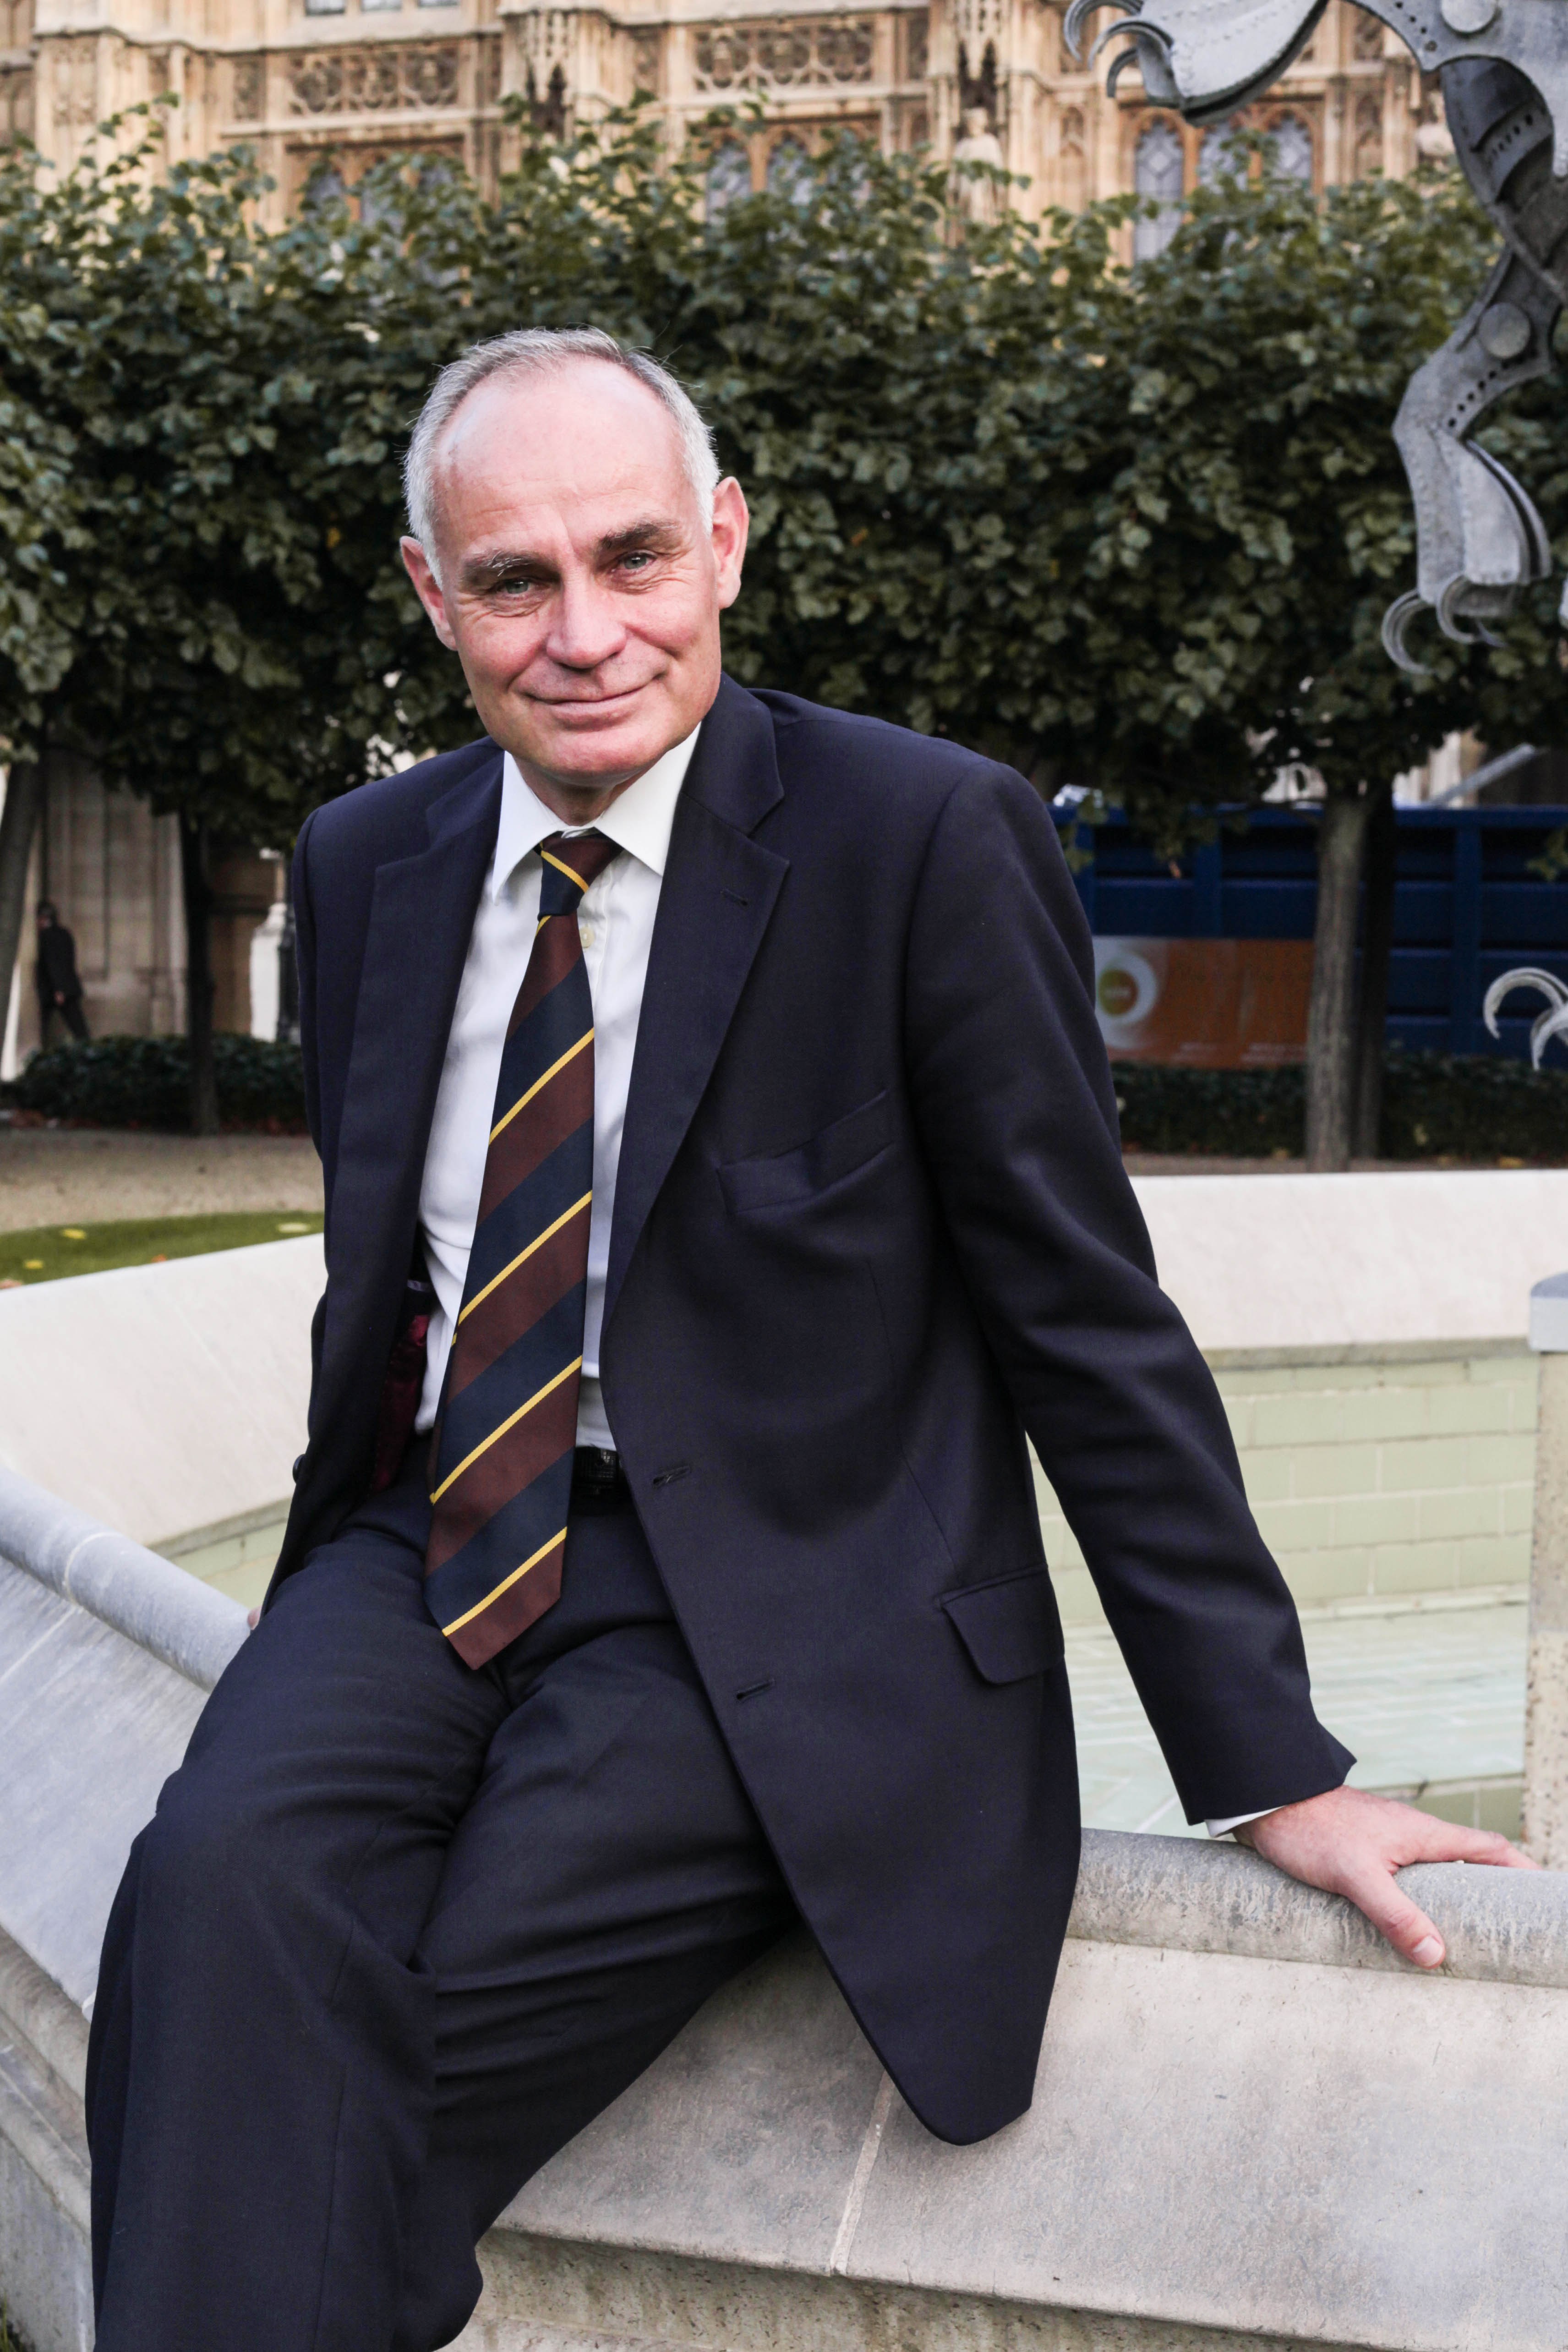 Crispin Blunt MP, Political Advisor to CLEAR